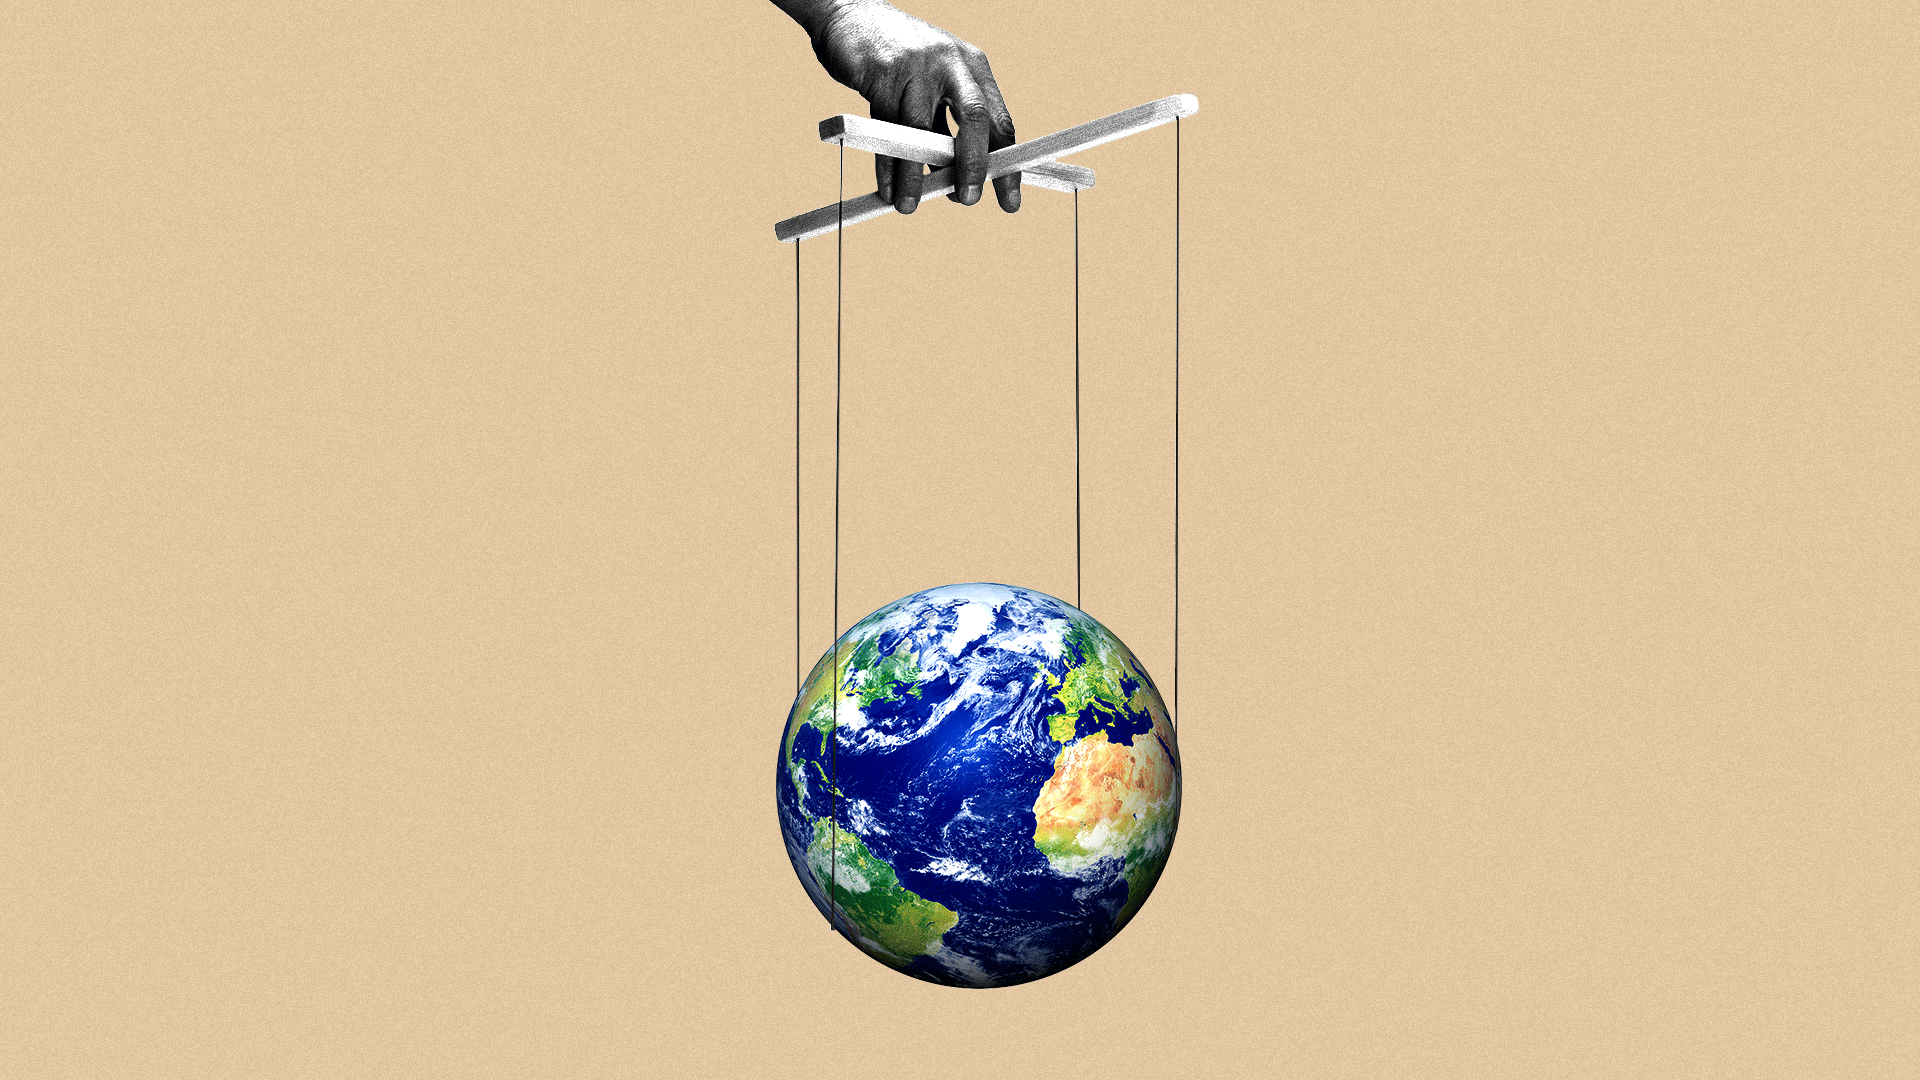 illustration of a marionette strings attached to a globe